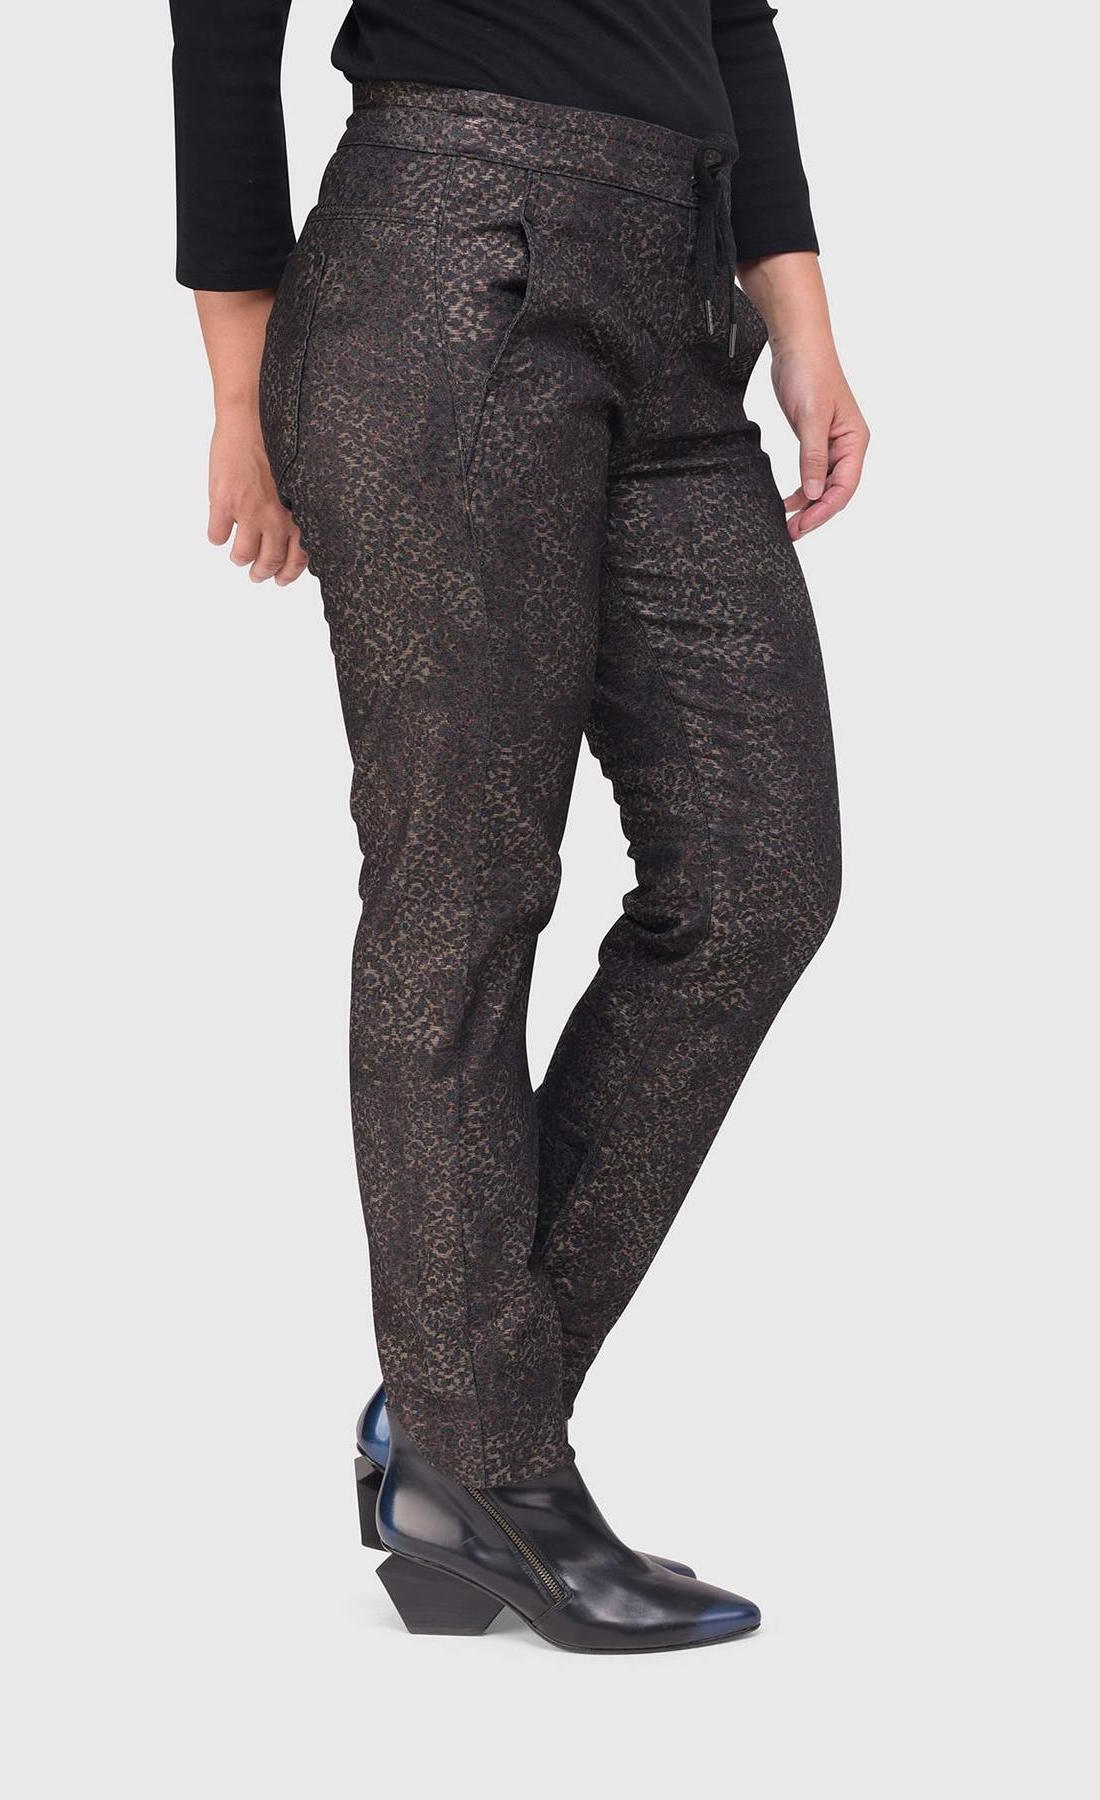 Bottom half right side view of a woman wearing the alembika iconic stretch pant in the color sepia. The pant is dark brown/black with a small metallic-like animal print. It also has a drawstring and tie waistband.